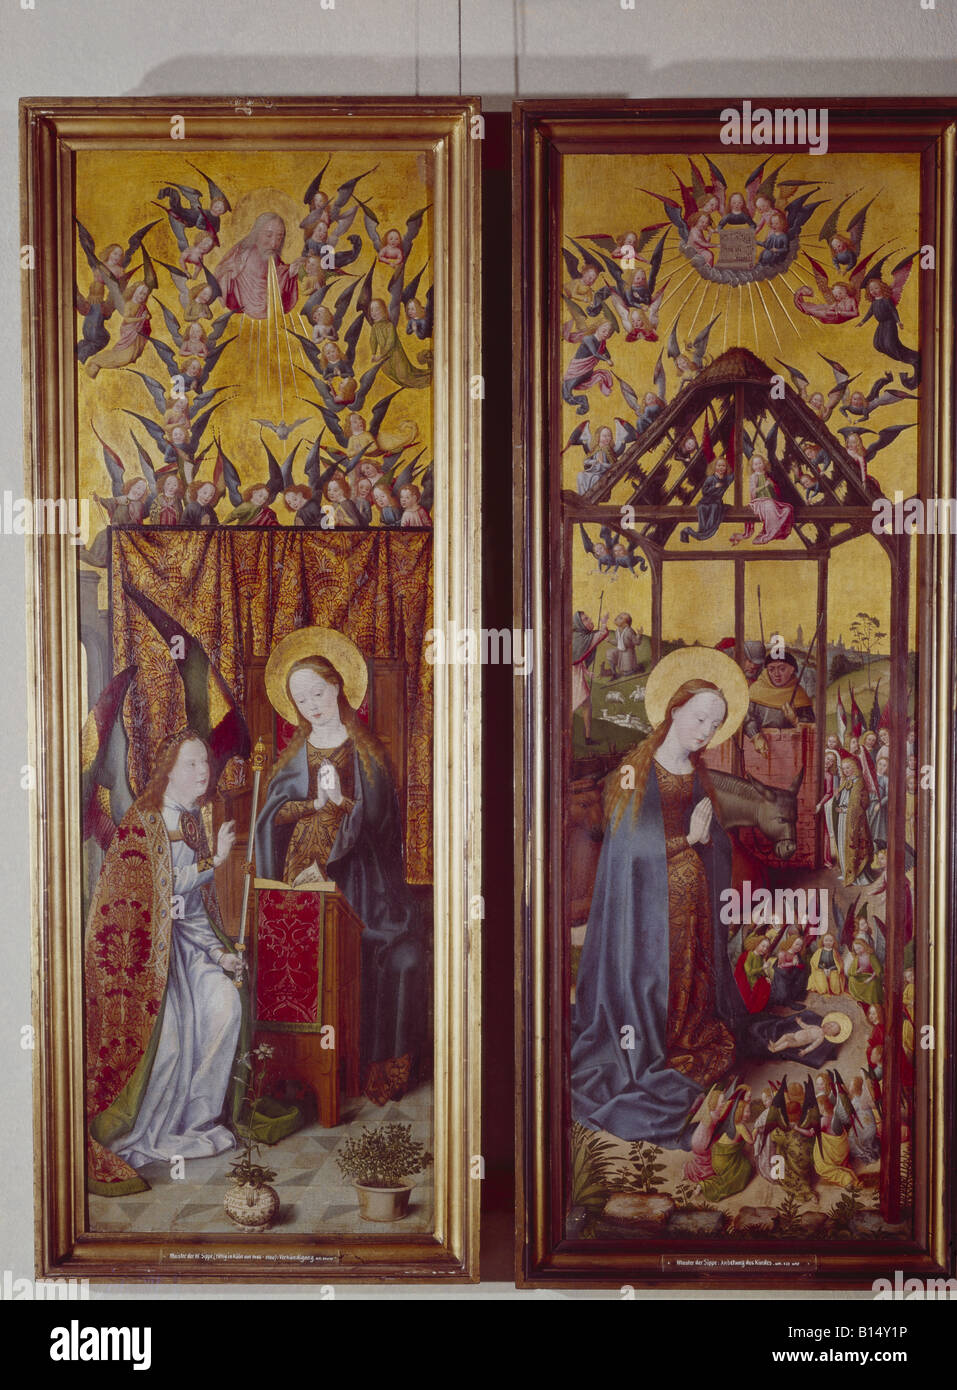 fine arts, Master of the Holy Kin, (1480 - 1520), painting, annunciation and birth of Christ, Germanic National museum, Nuremberg, Germany, Artist's Copyright has not to be cleared Stock Photo